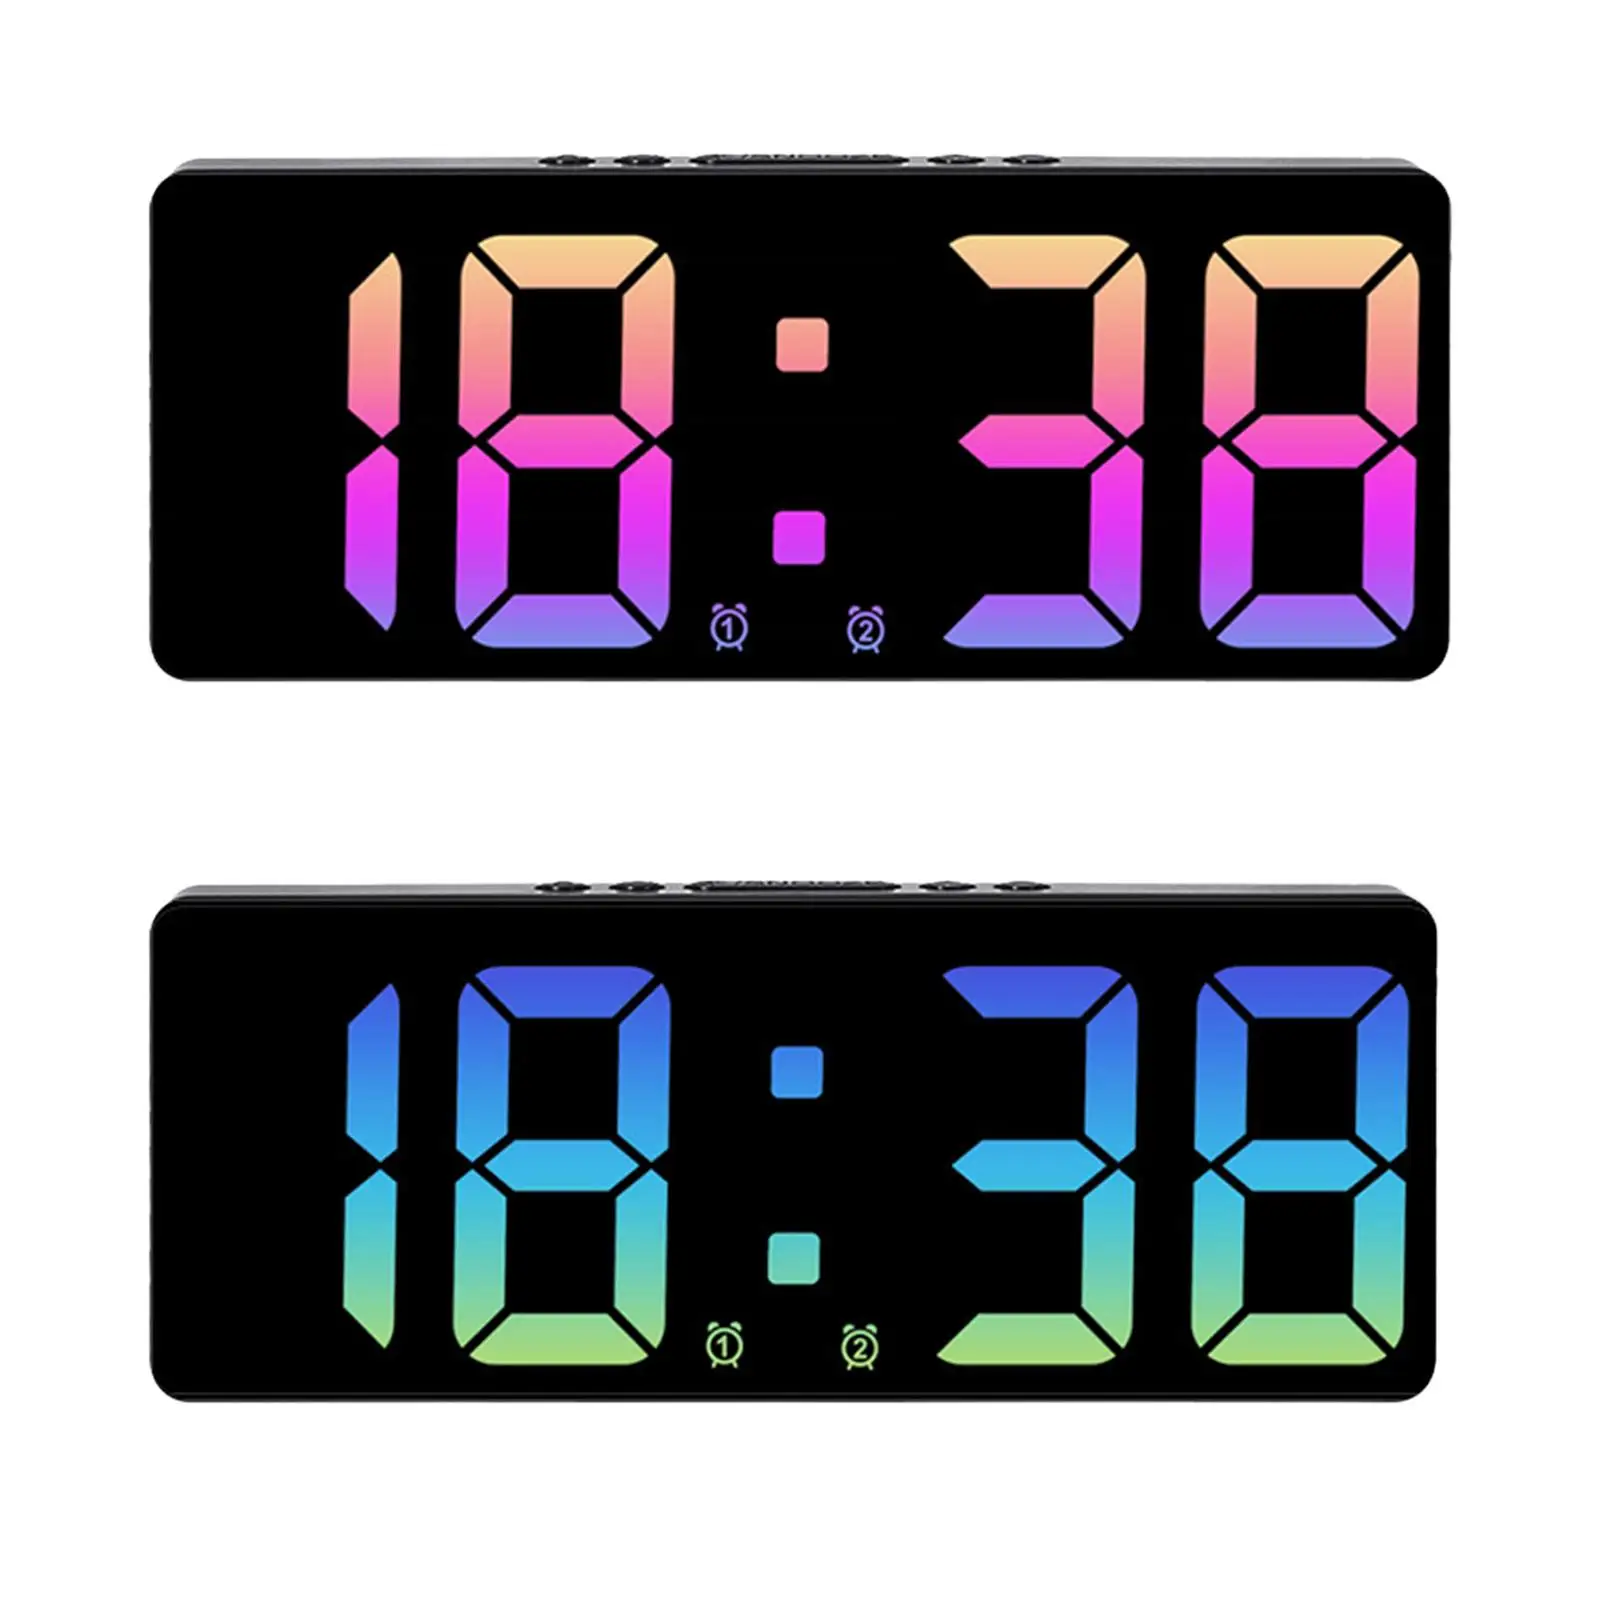 15.5cm Digital Alarm Clock Bedside Clock 6x0.9x2.4inch 12 Hour/24 Hour Portable Snooze Function for Bedroom Multipurpose Stylish